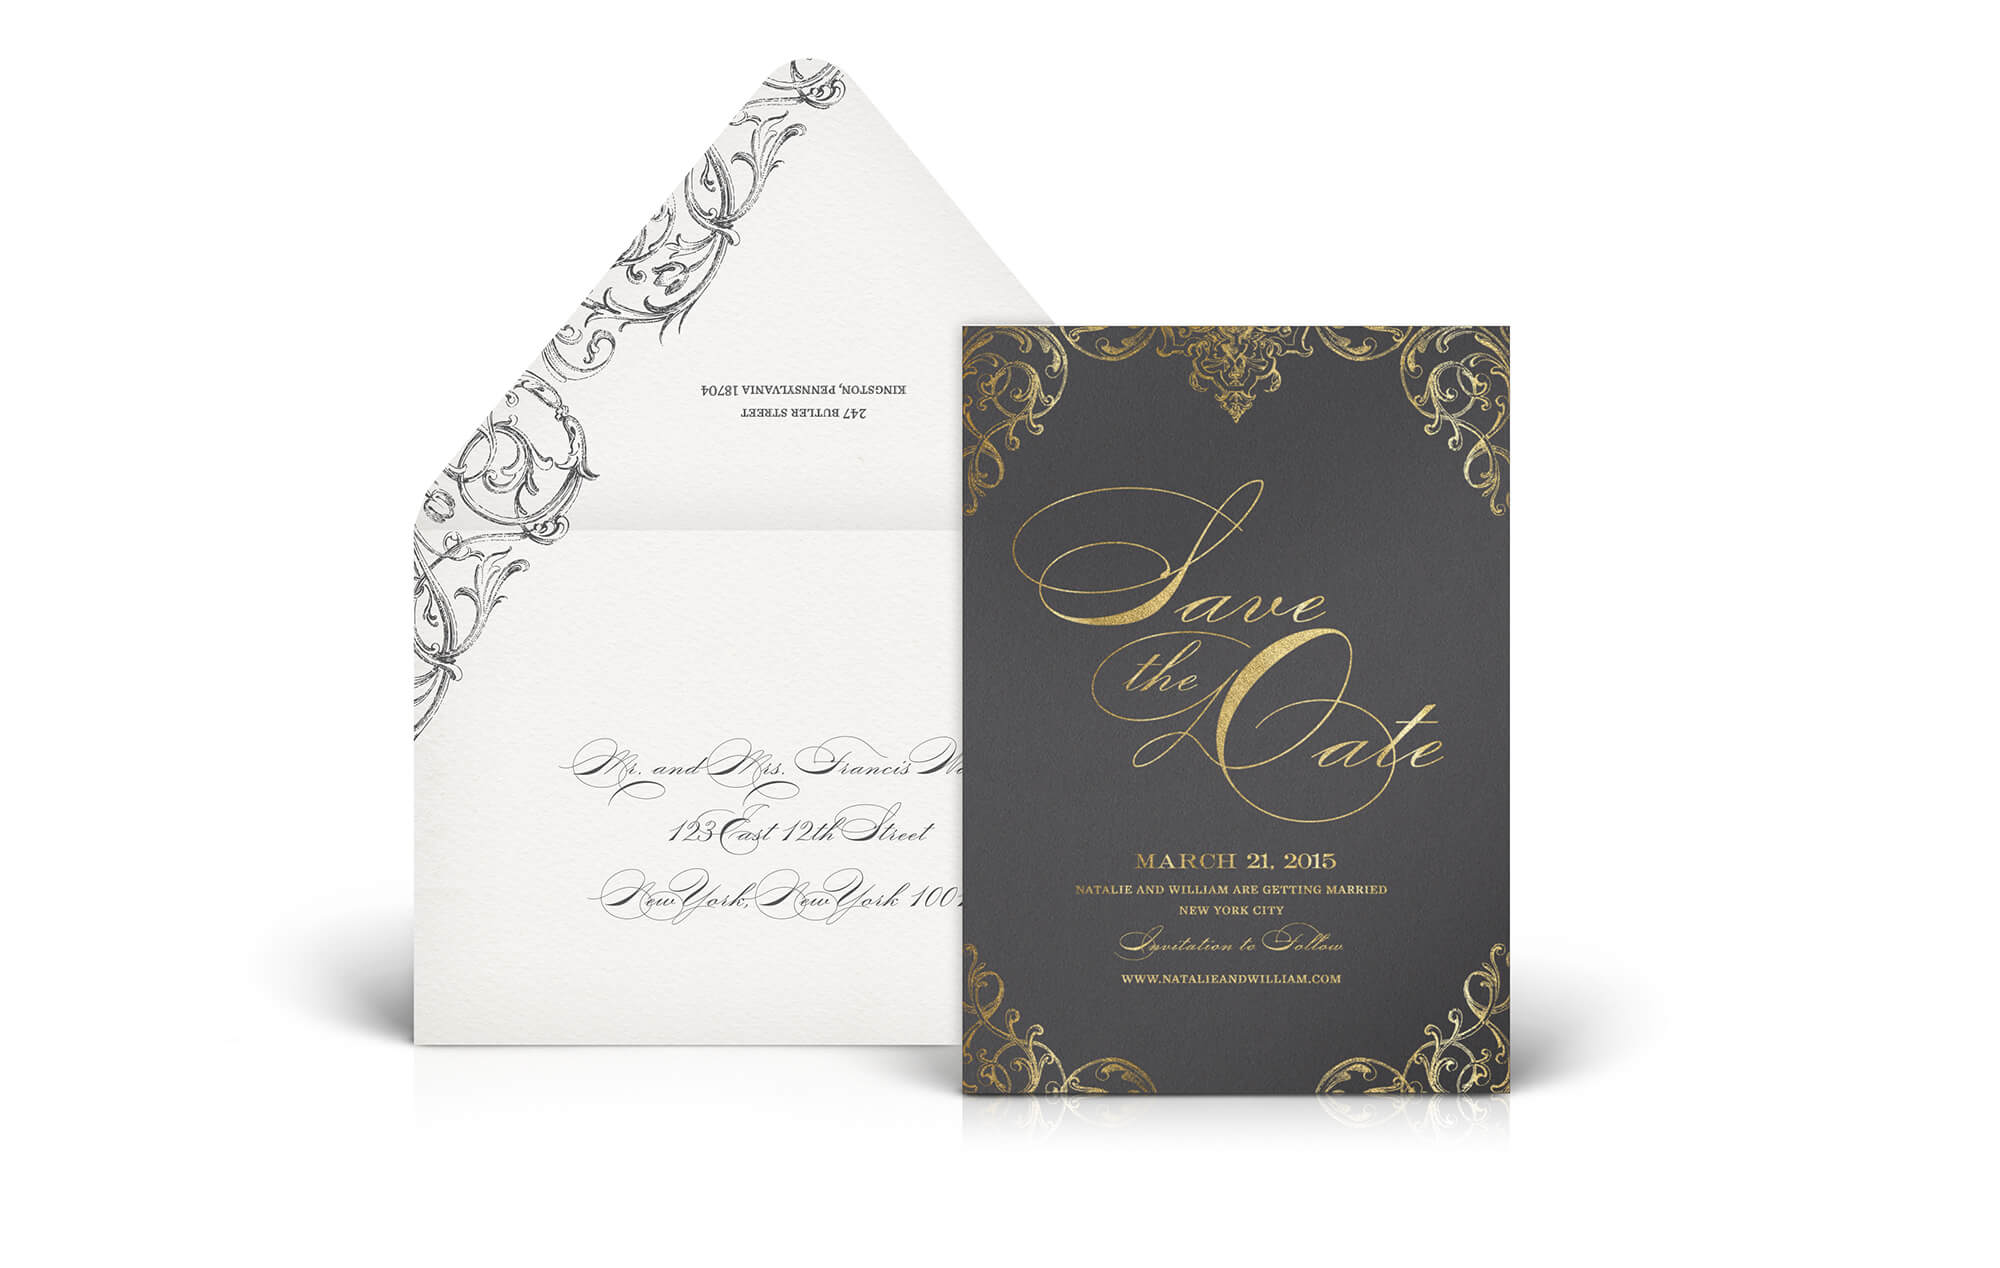 Ornate scrollwork save the date